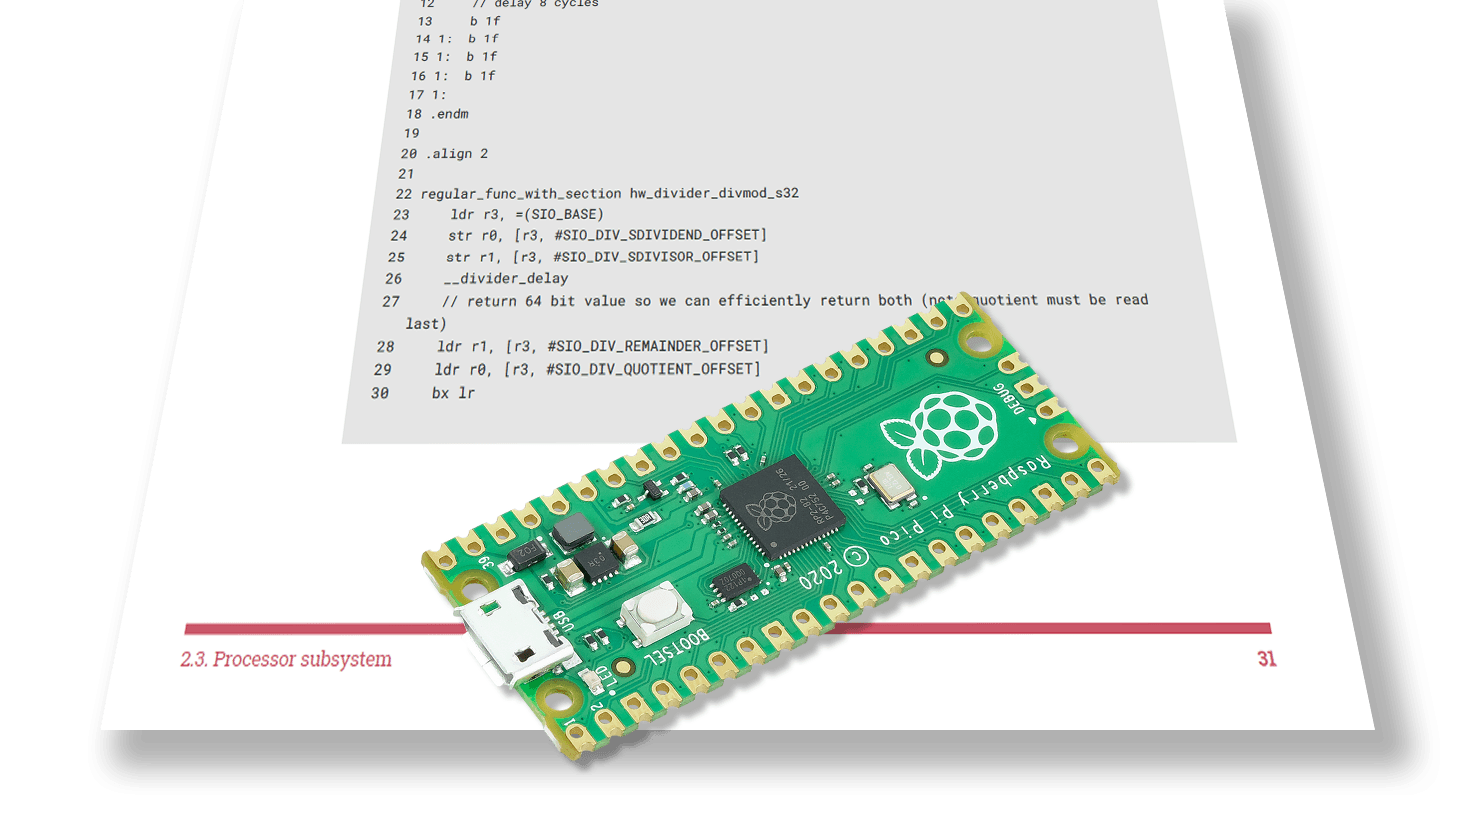 Cilia Maan oppervlakte links Assembly Language on the Raspberry Pi Pico | MagPi